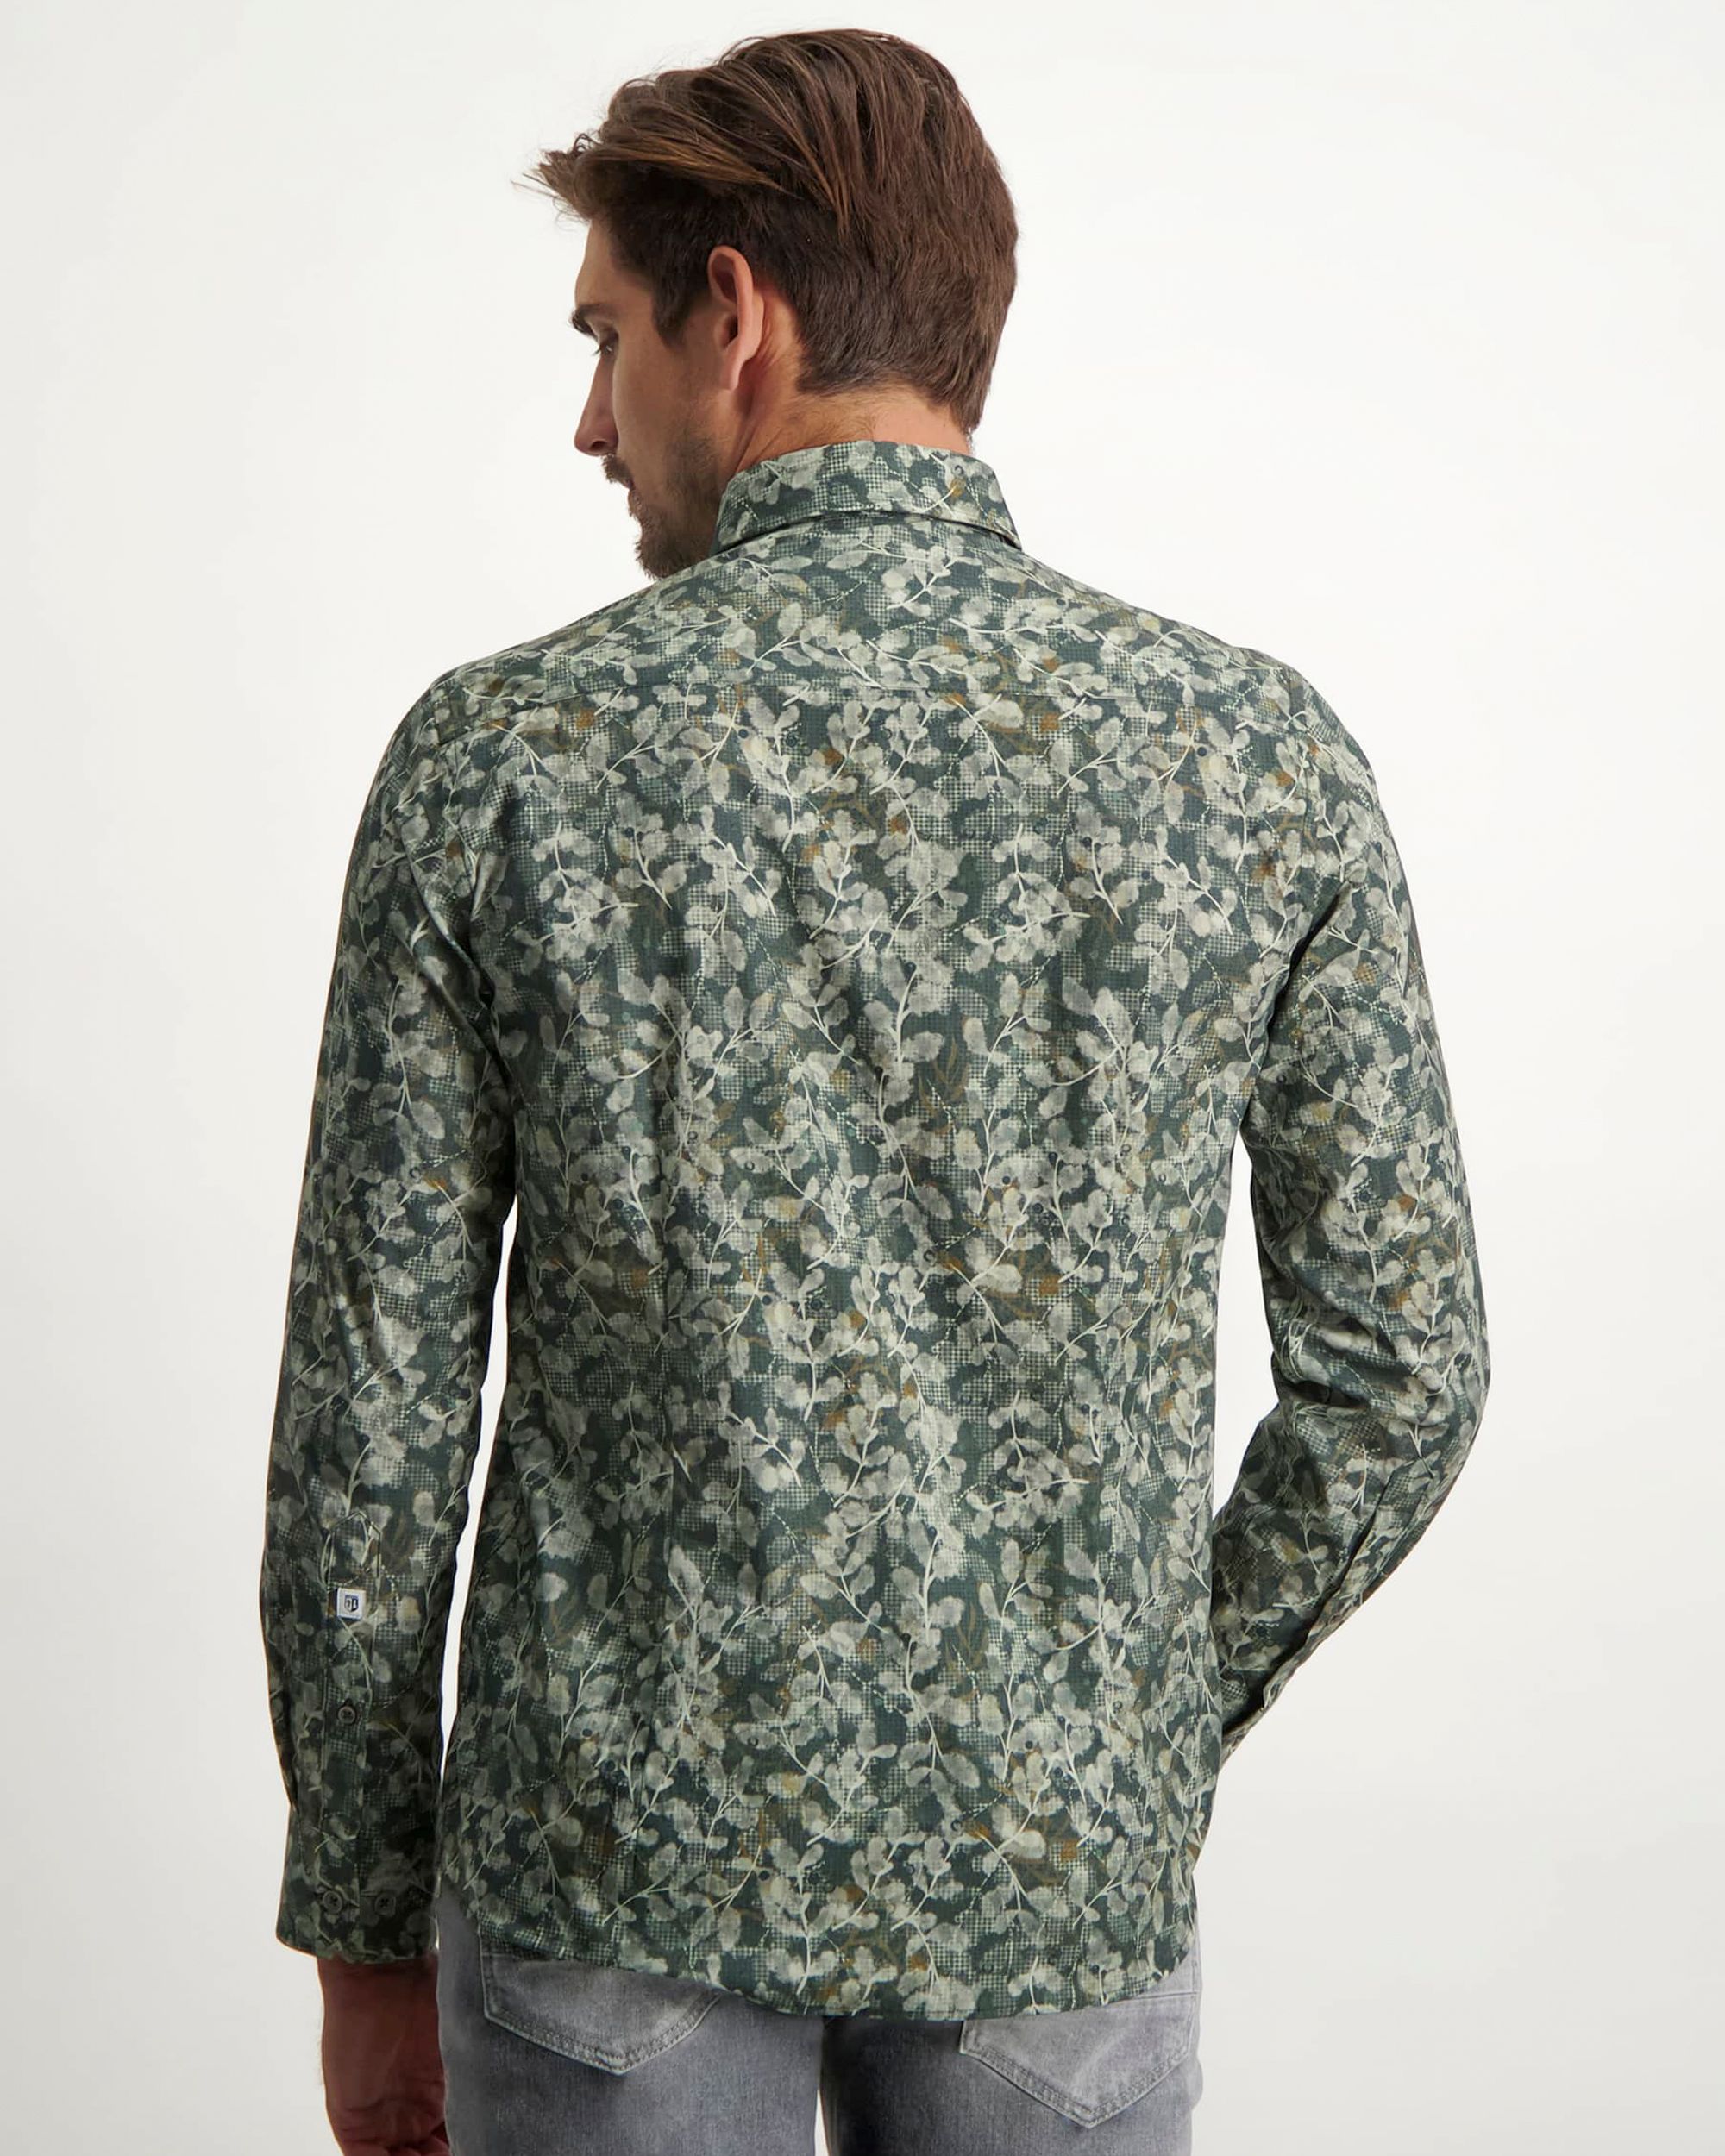 State of Art Casual Overhemd LM Groen 081142-001-4XL